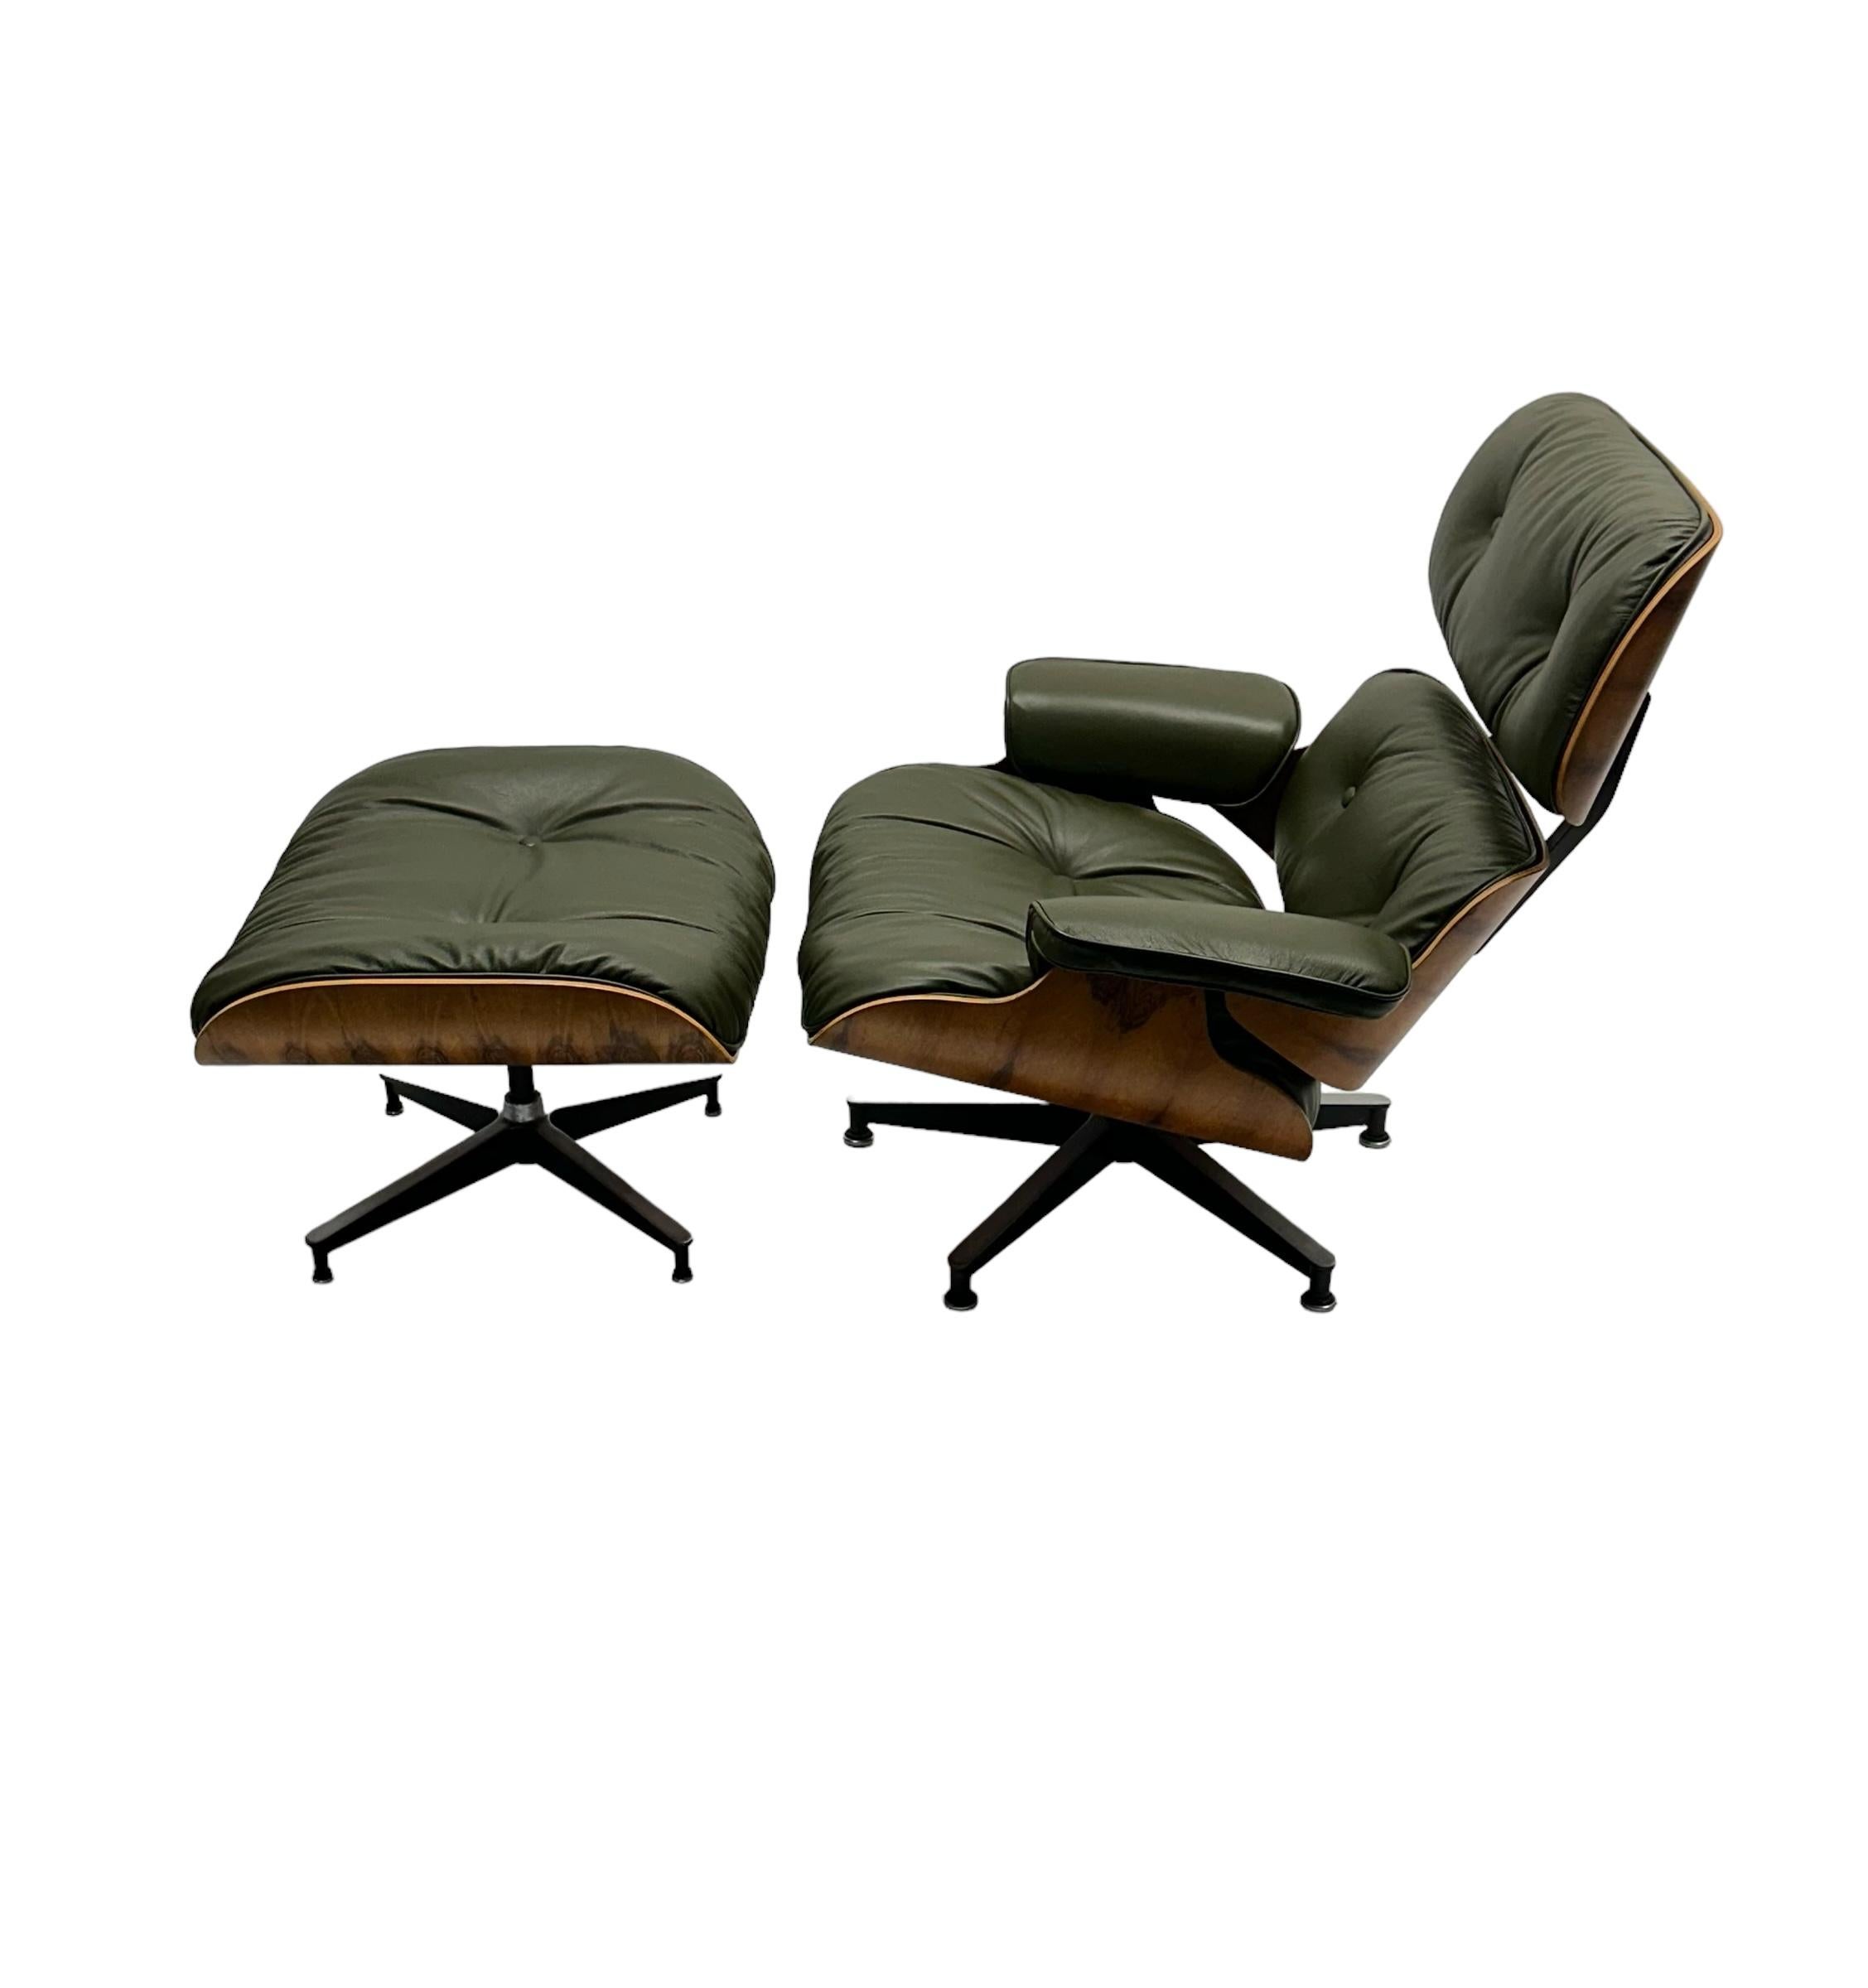 Restored original edition Herman Miller Eames lounge chair and ottoman. New custom made leather cushions (3-4 week production time). Wood surfaces refinished and lacquered. Metal surfaces repainted and polished. Chair base bushing oiled and swivels